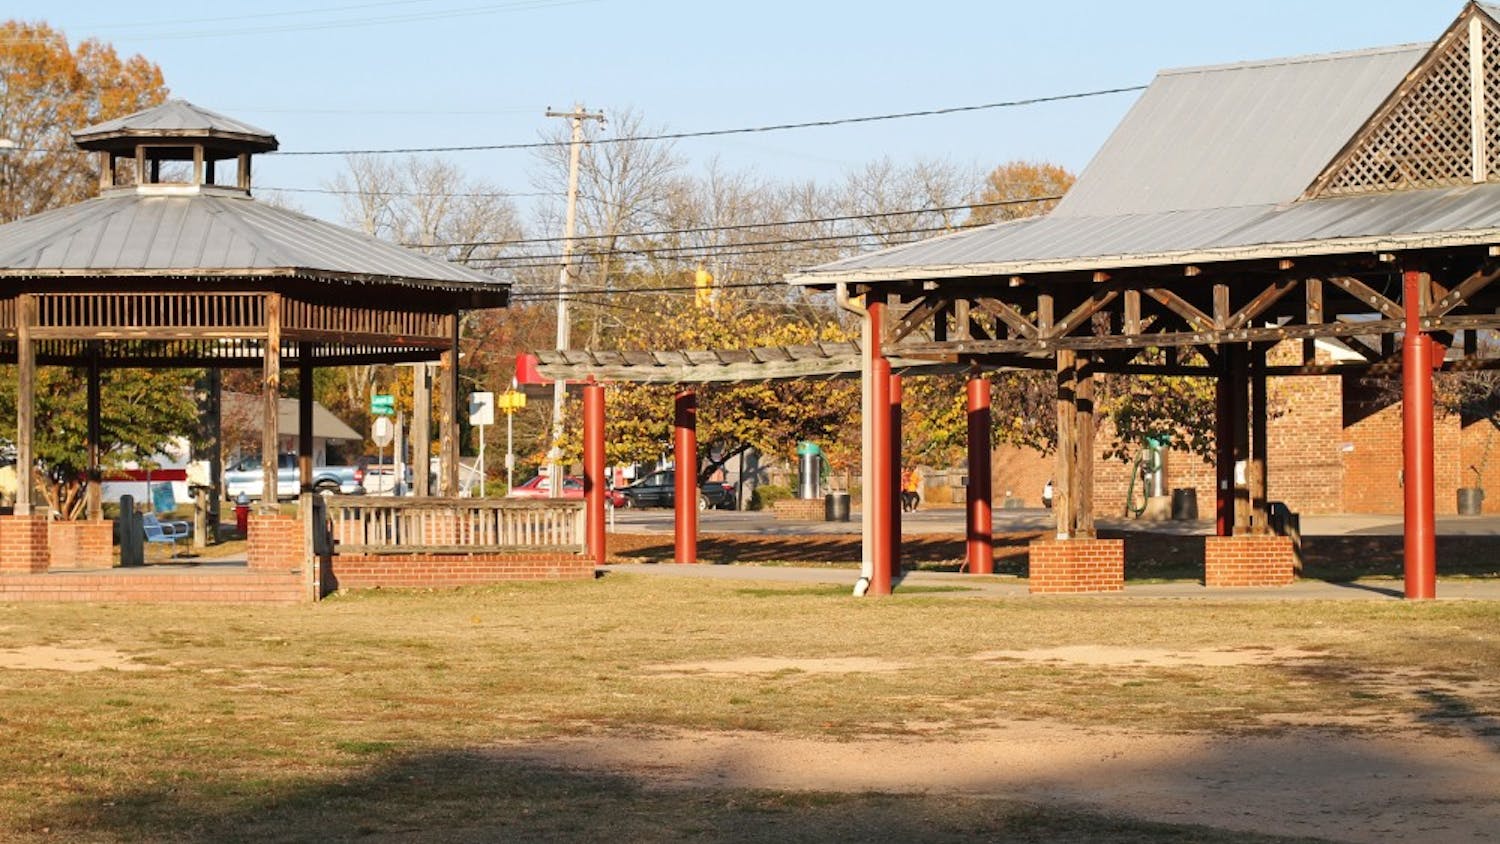 The Town of Carrboro Board of Alderman approved plans to redesign the Carrboro Town Commons to make improvements.